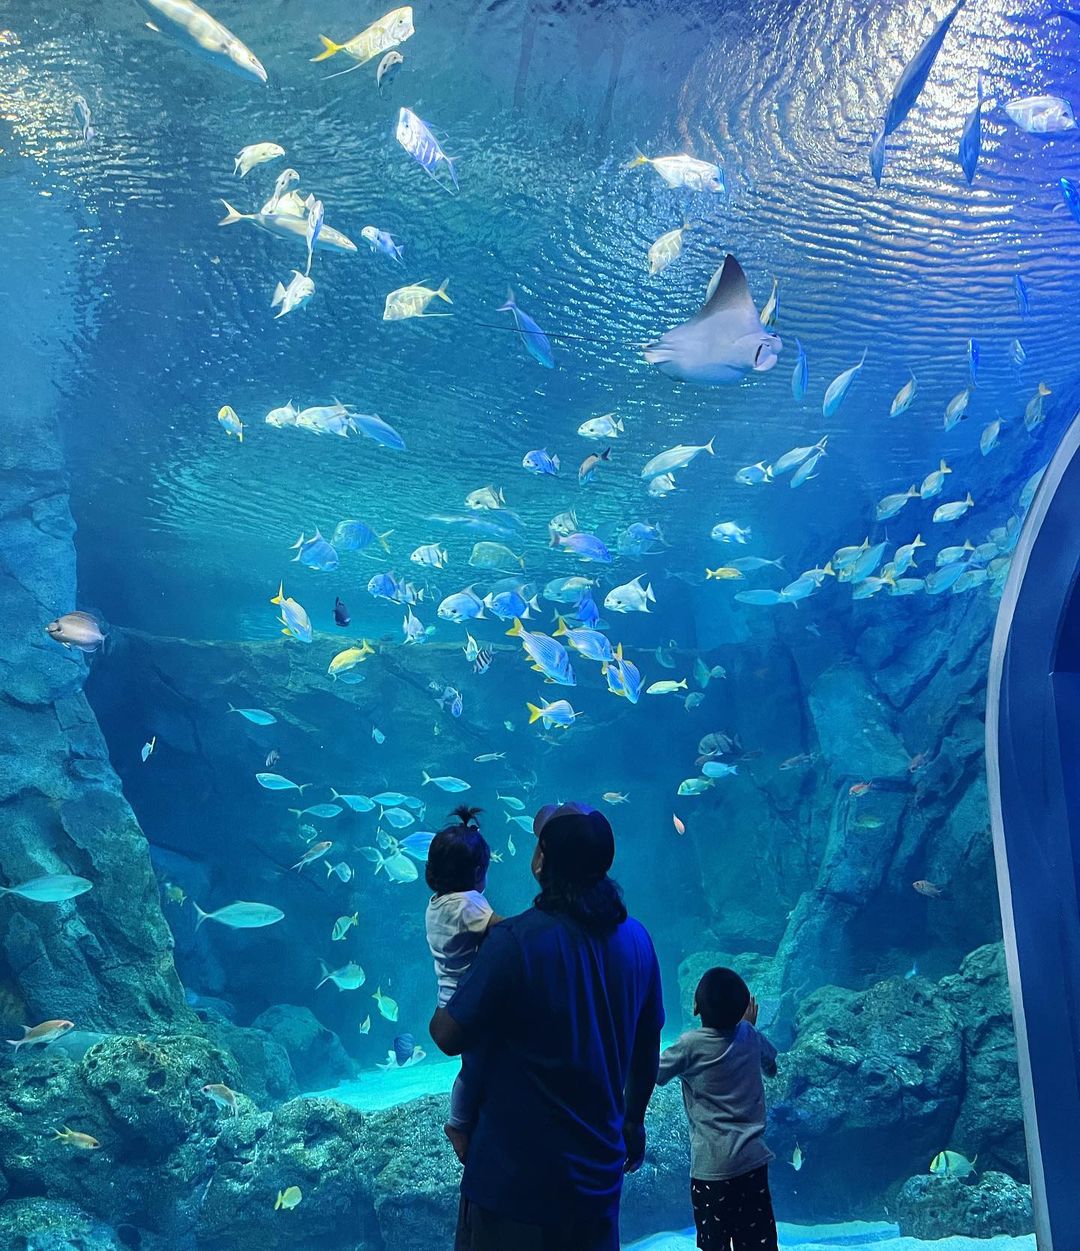 A family looking at the fish in the St. Louis Aquarium at Union Station. Photo by Instagram user @brianne_slover12